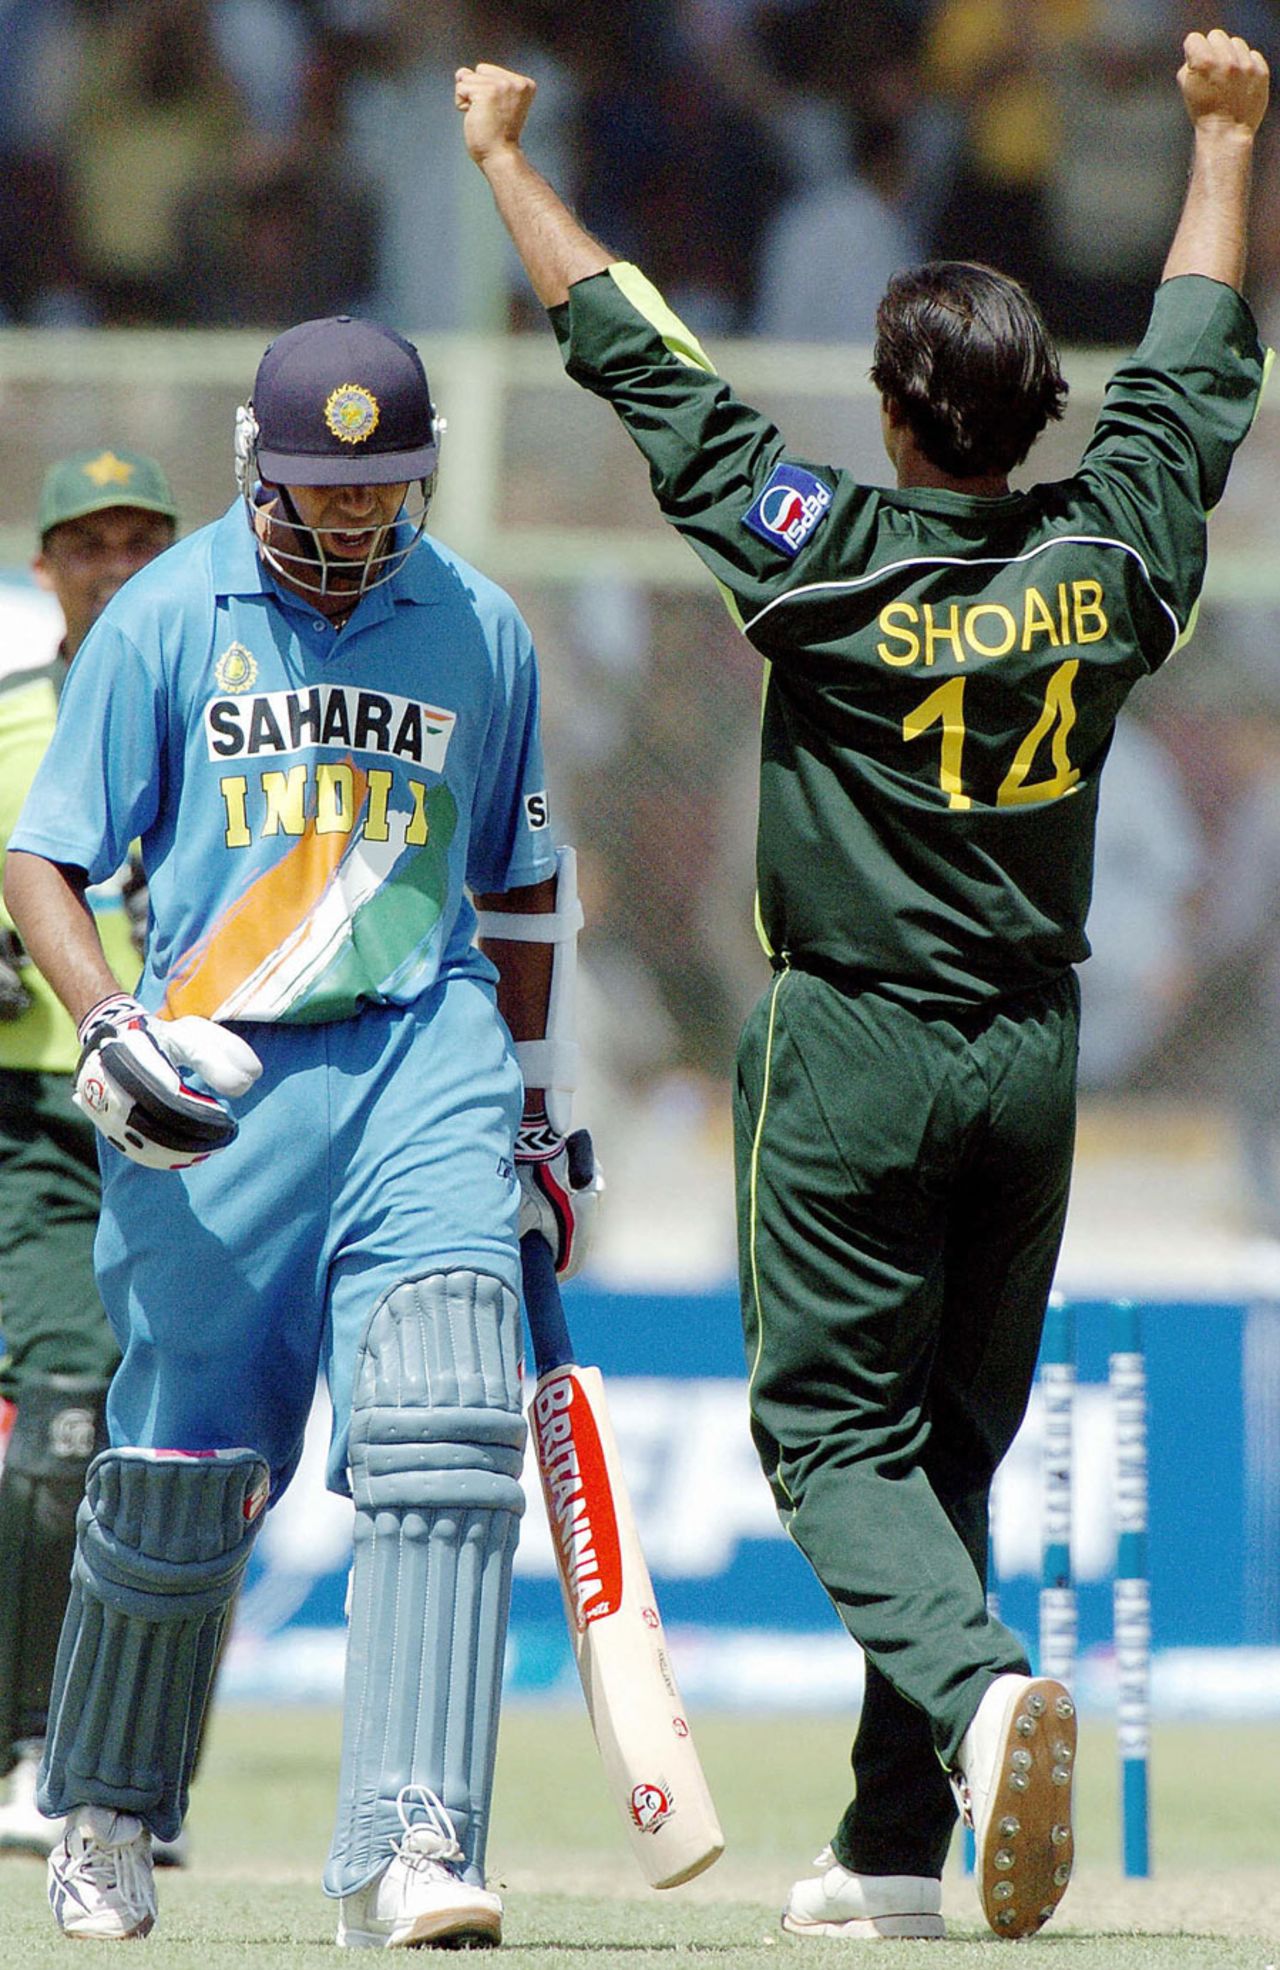 Rahul Dravid departs after being bowled by Shoaib Akhtar for 99, Pakistan v India, 1st ODI, Karachi, March 13, 2004